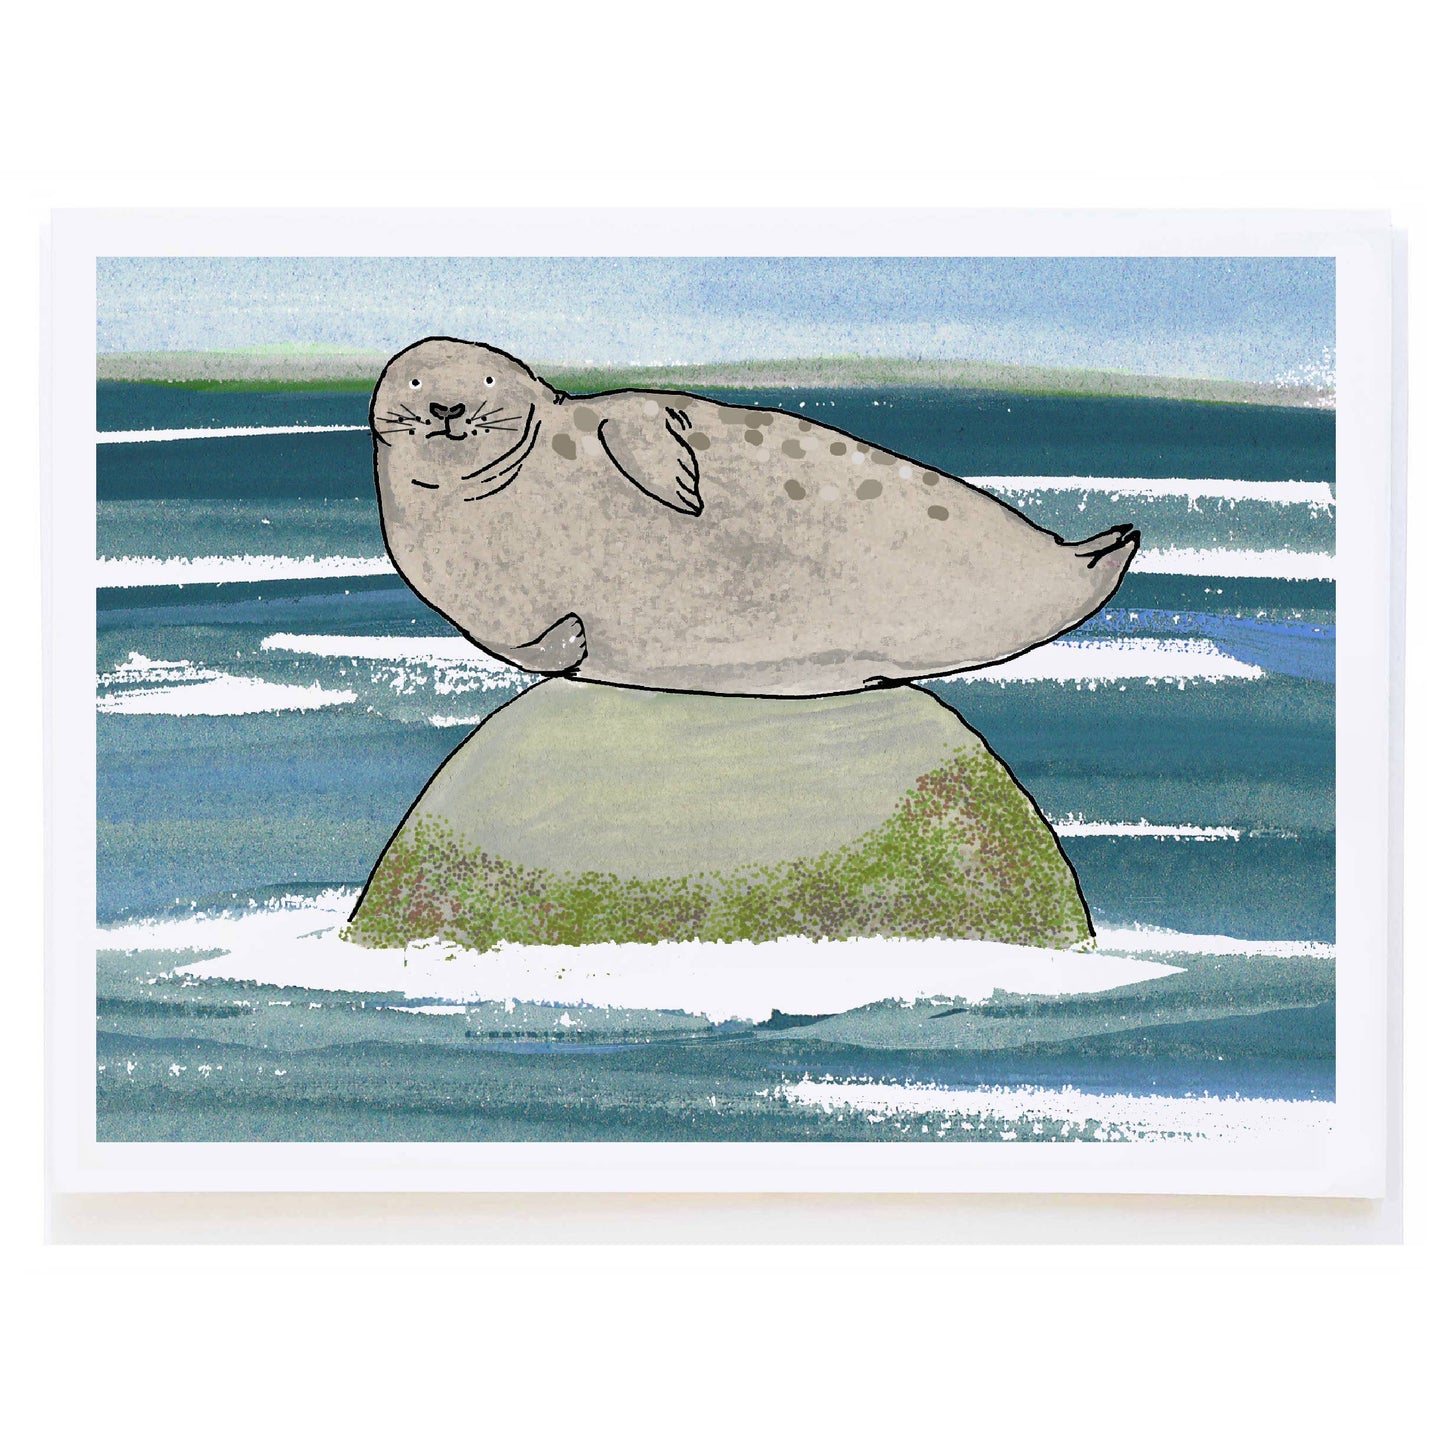 Seal on Rock - Greeting Card (Blank Inside) by Molly O